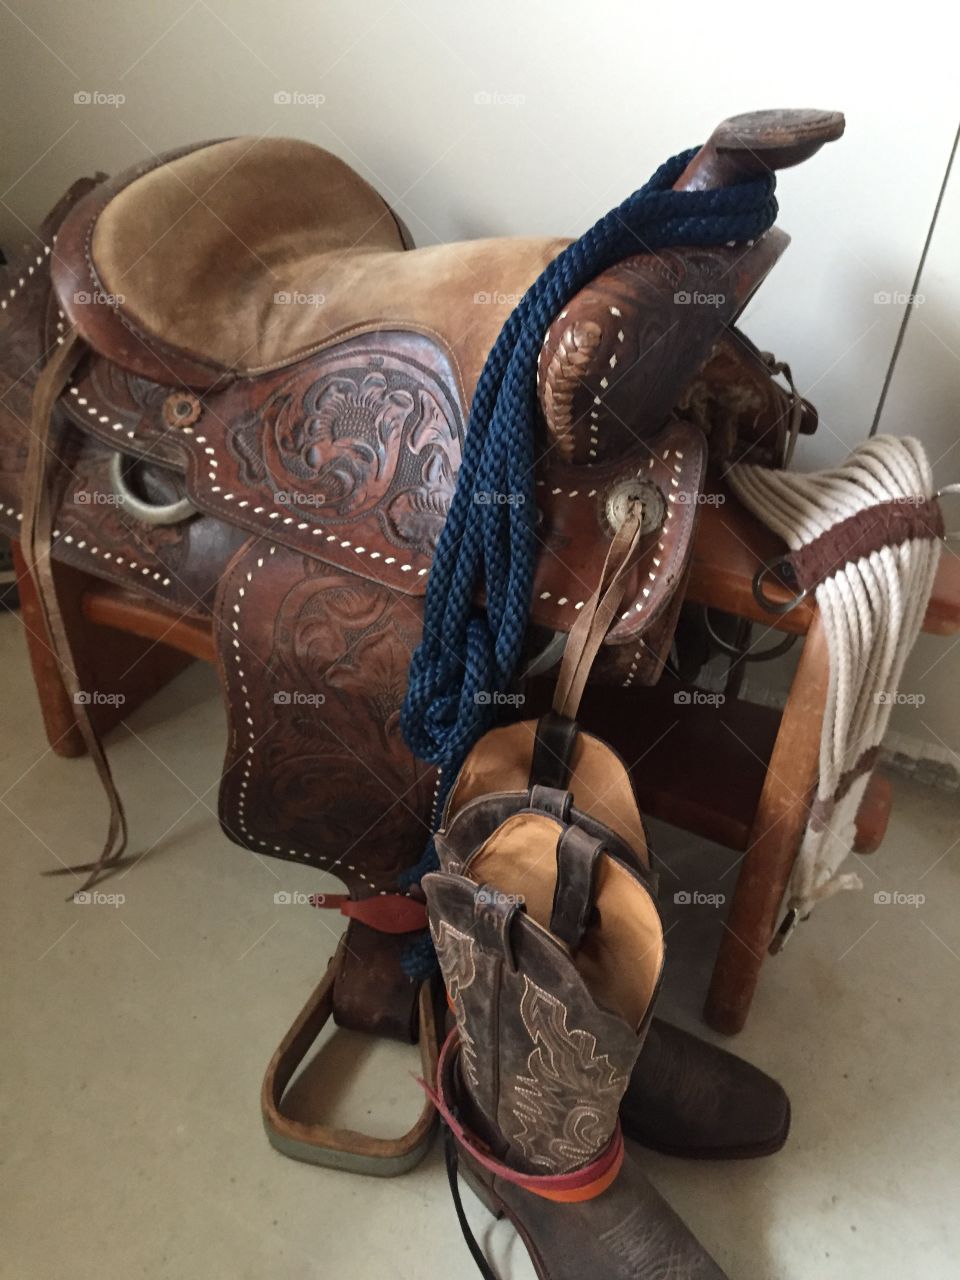 Notice the fine details that the craftsman did on making this beautiful saddle